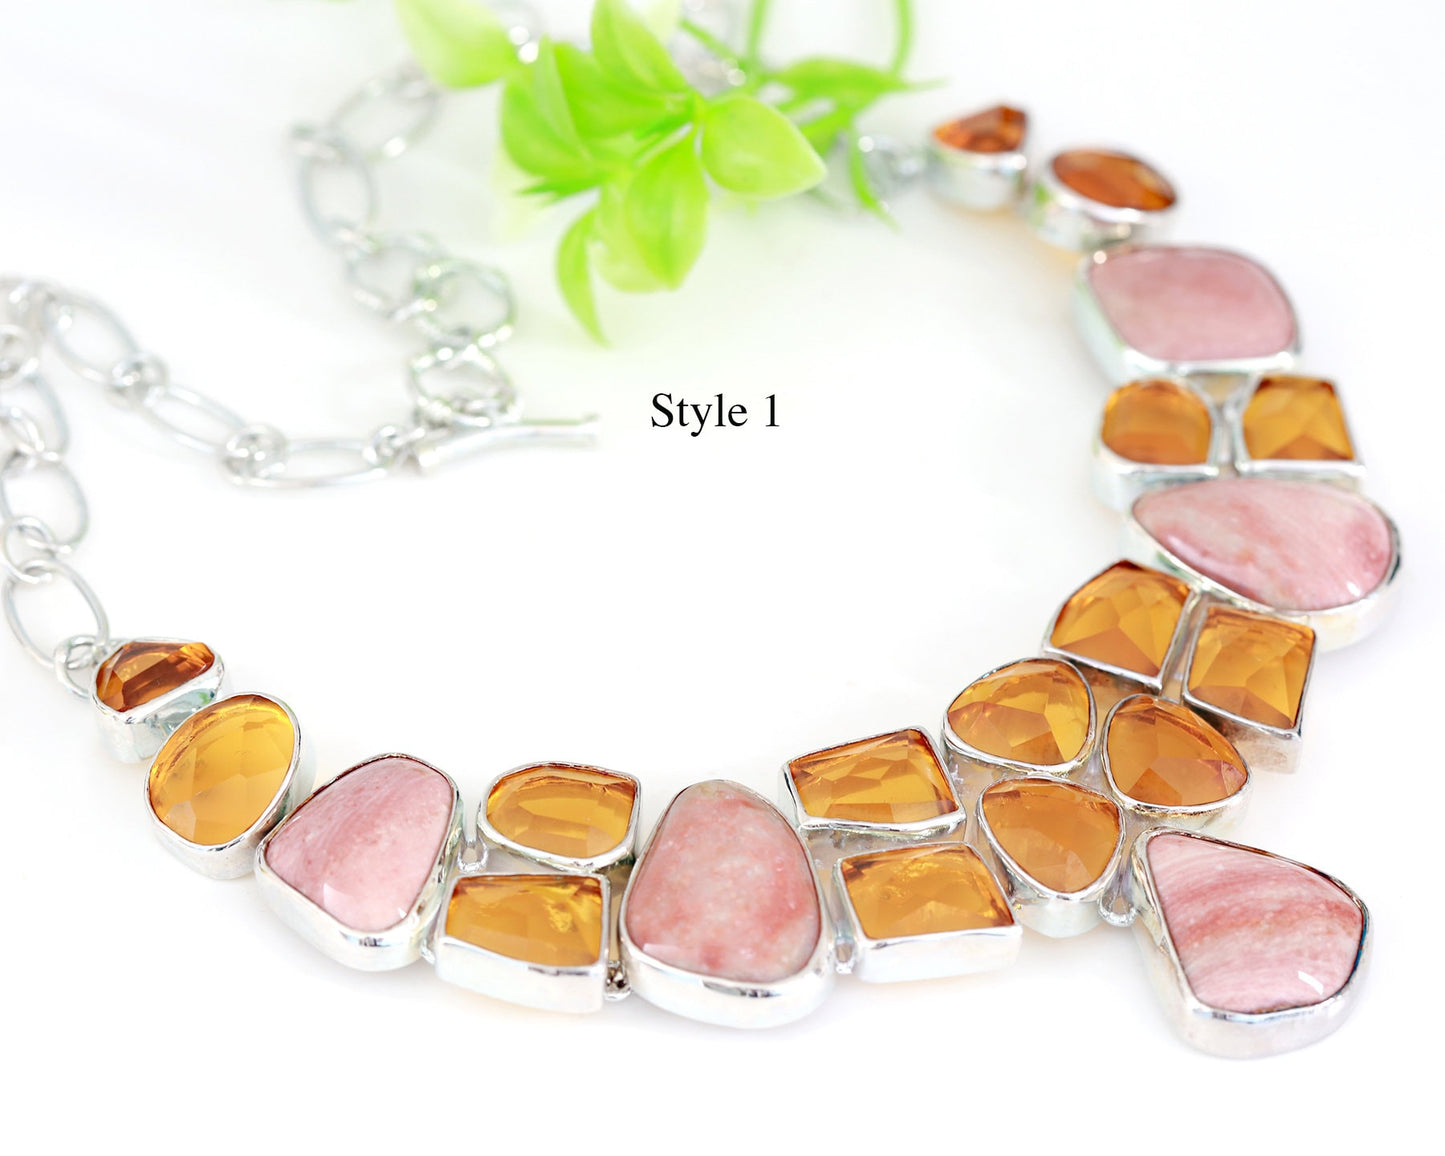 Silver Polish Gemstone choker necklace, Synthetic Gem stone Topaz and Rose Quartz necklace | Amethyst Crystal stone necklace |Indian Designs